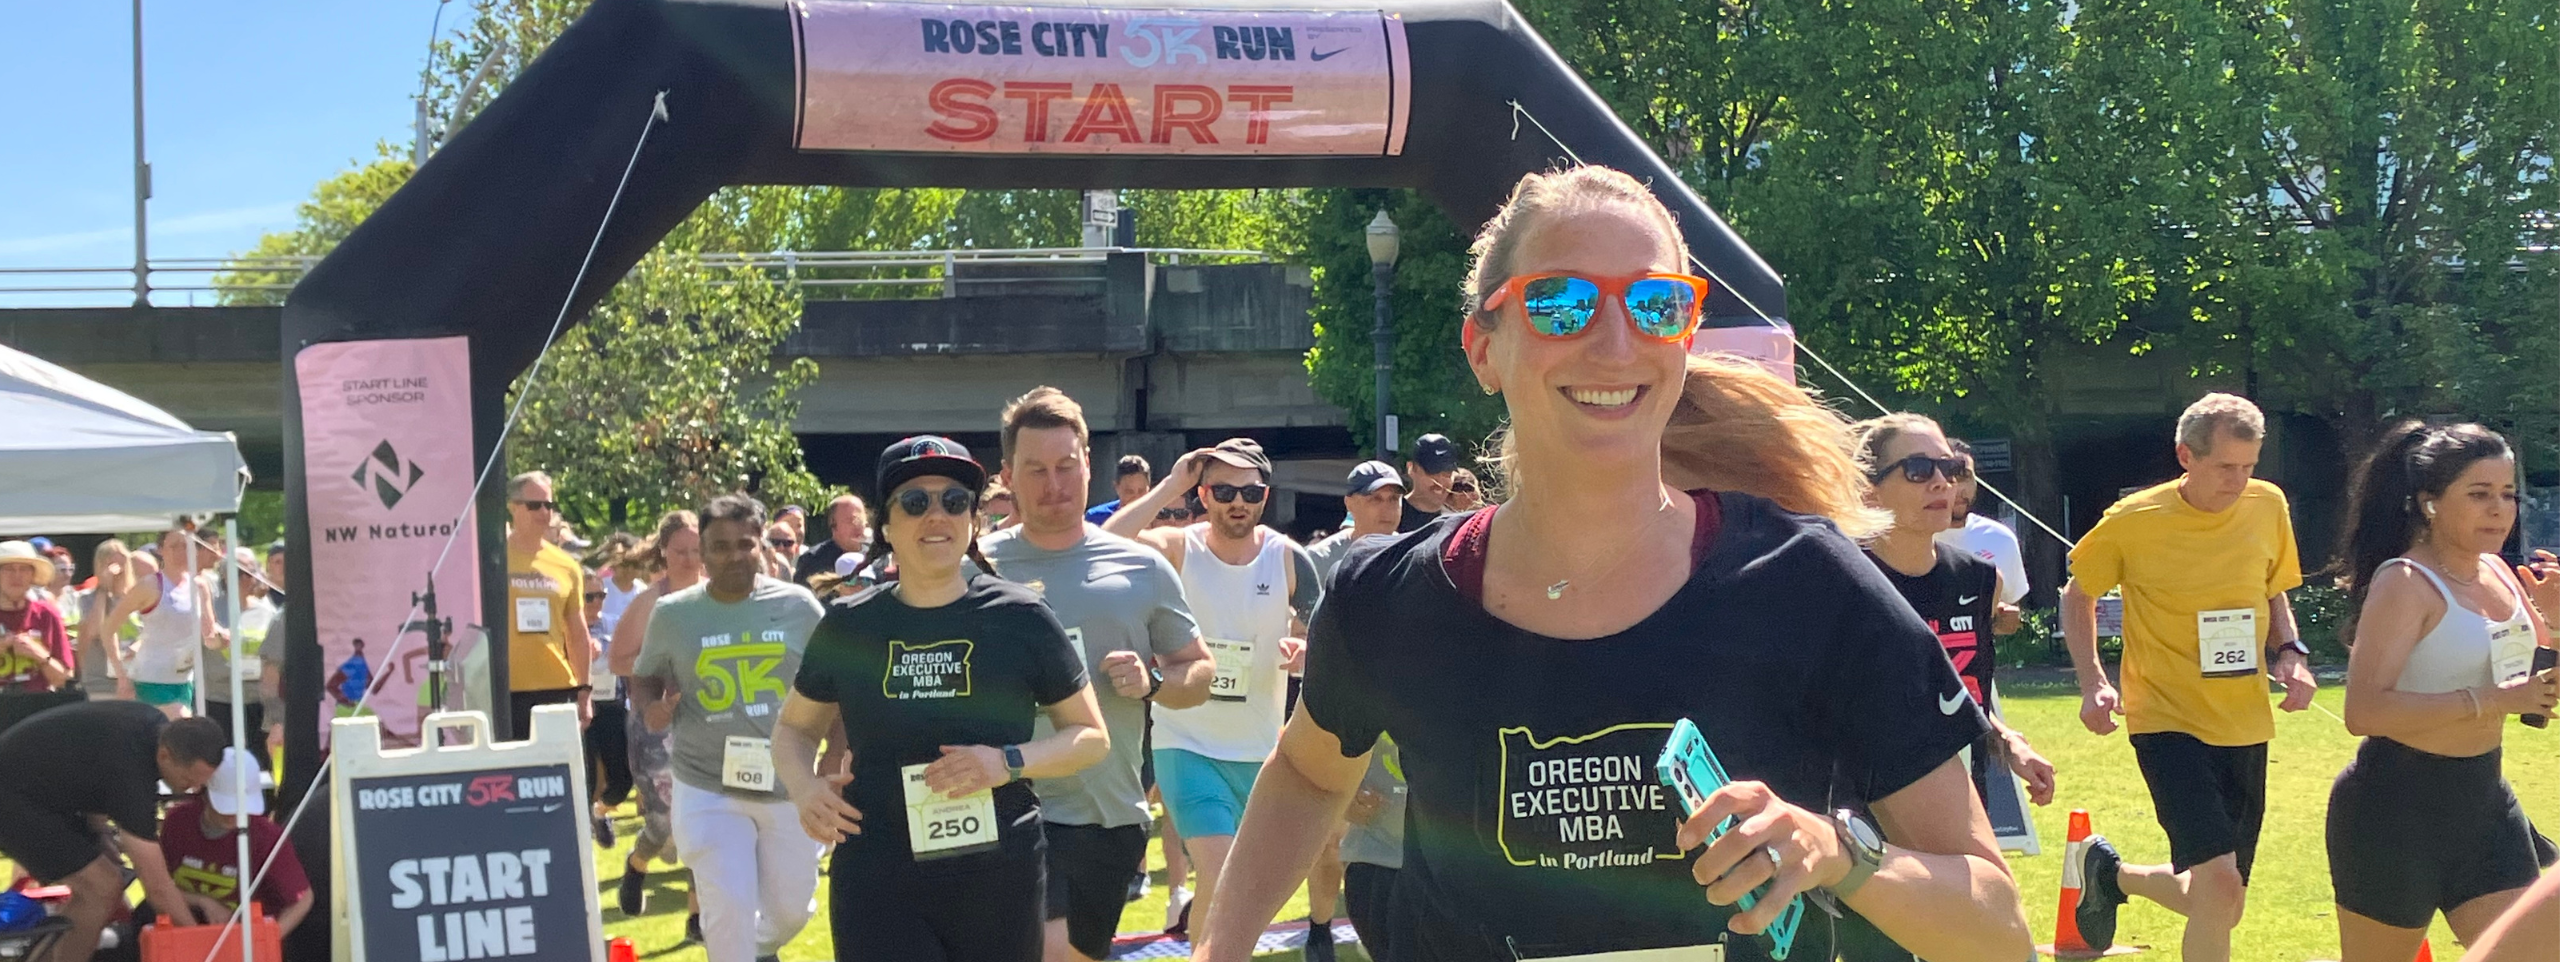 Smiling lady runner leads the race for the Rose City 5K with pink sunglasses